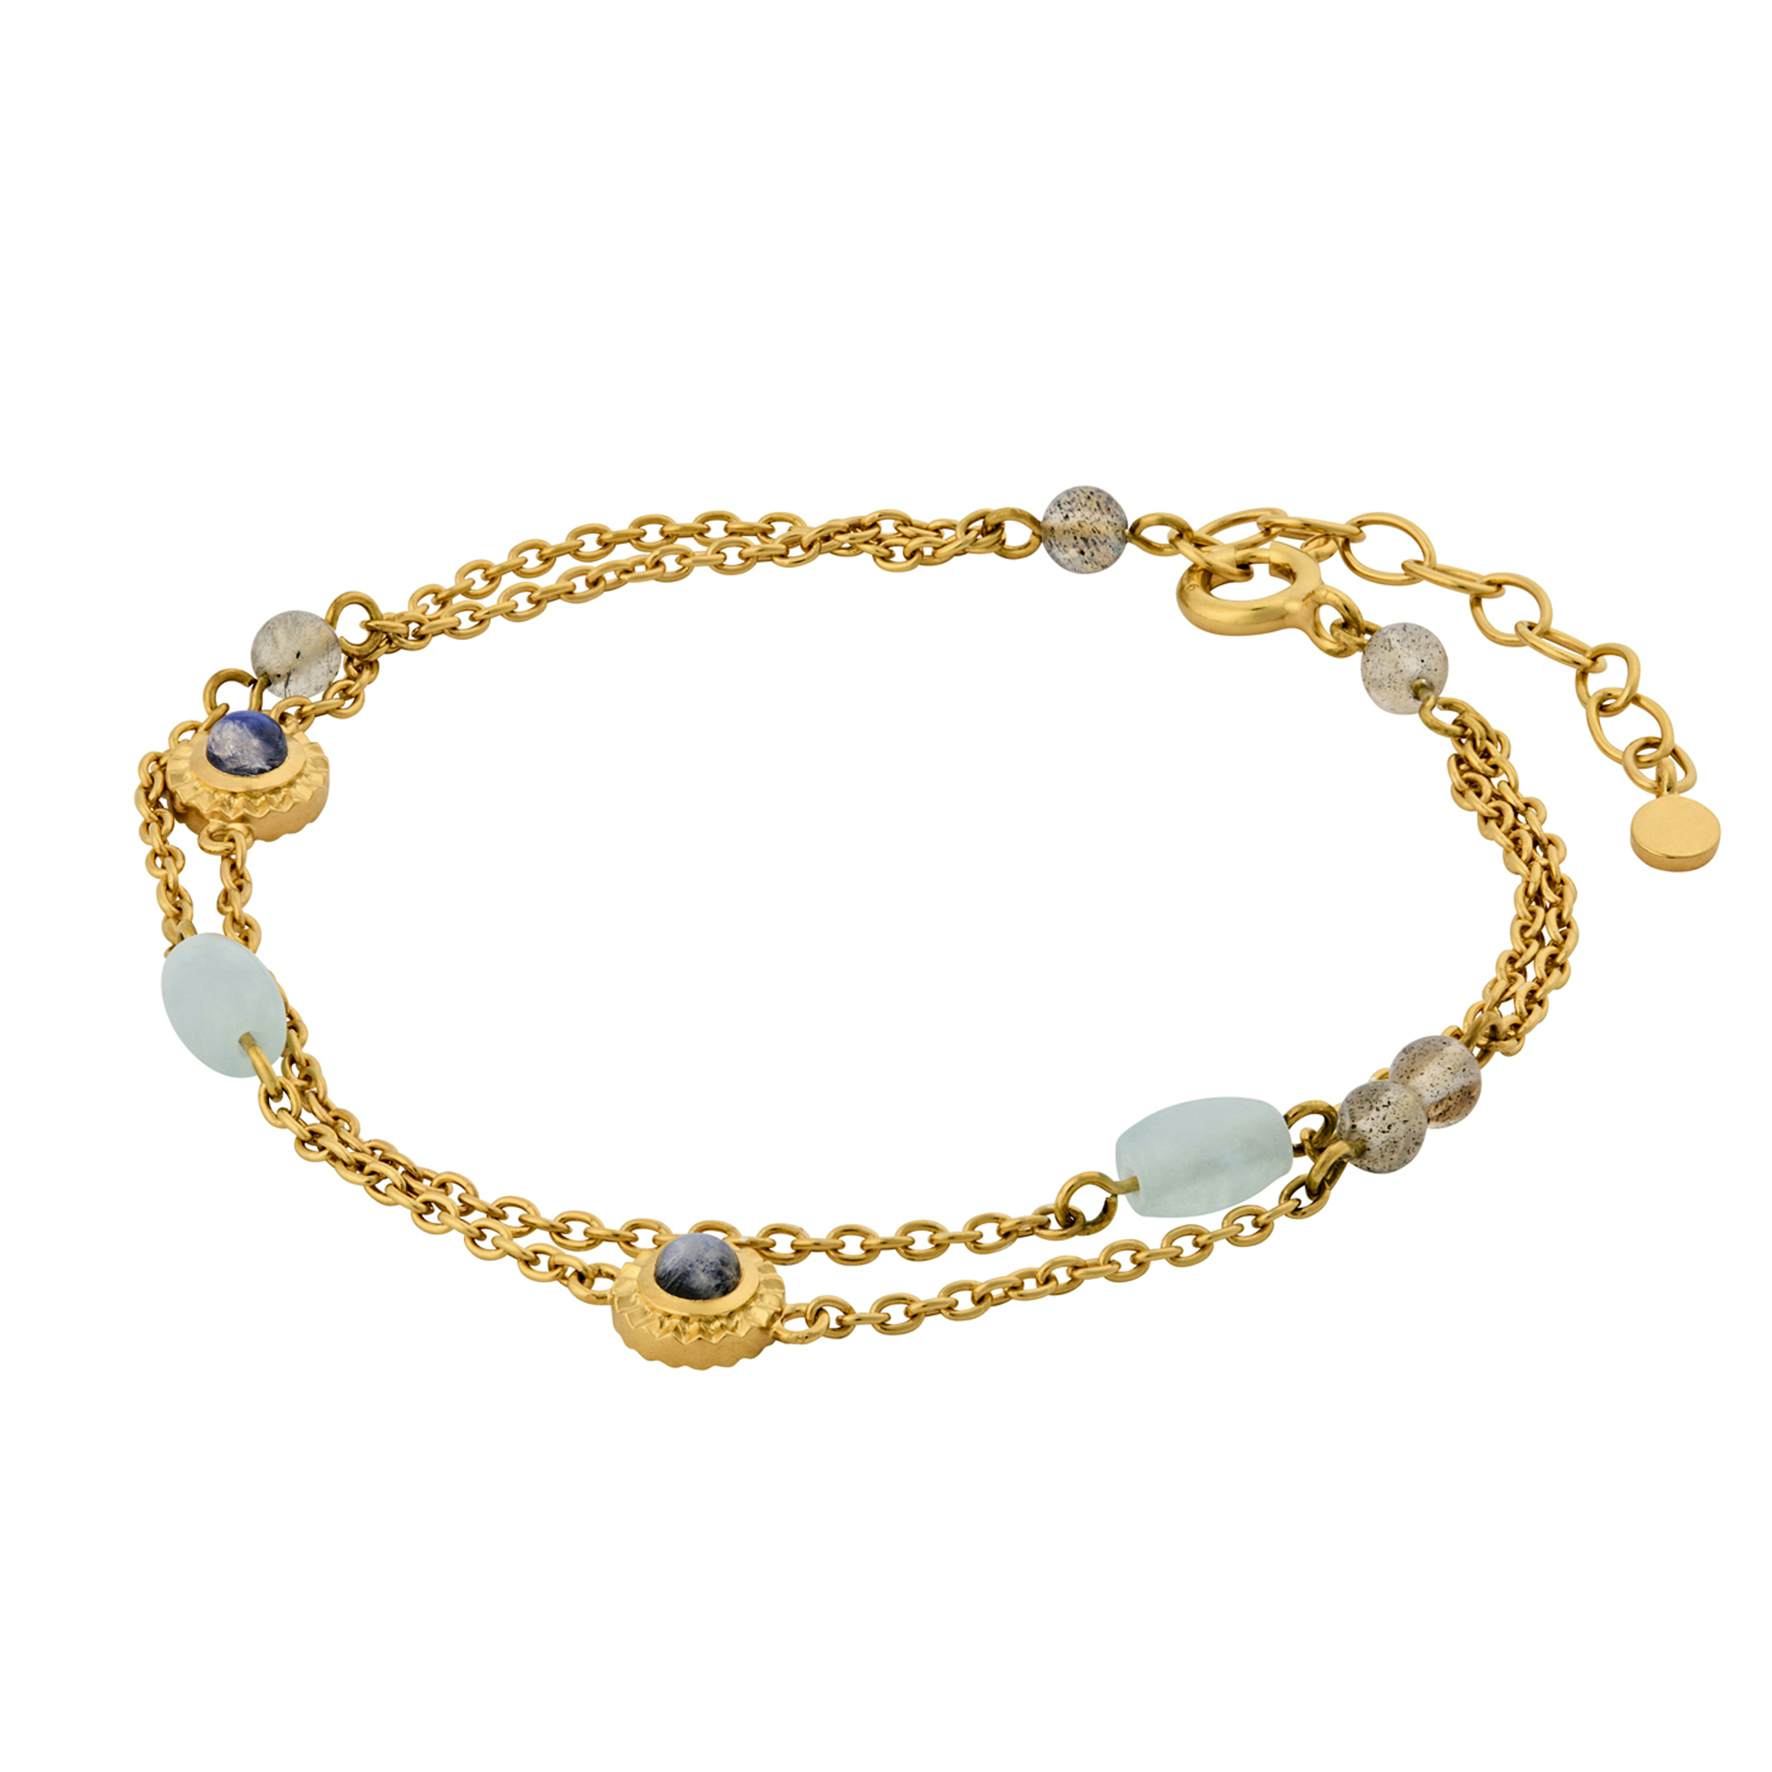 Autumn Sky Bracelet from Pernille Corydon in Goldplated-Silver Sterling 925